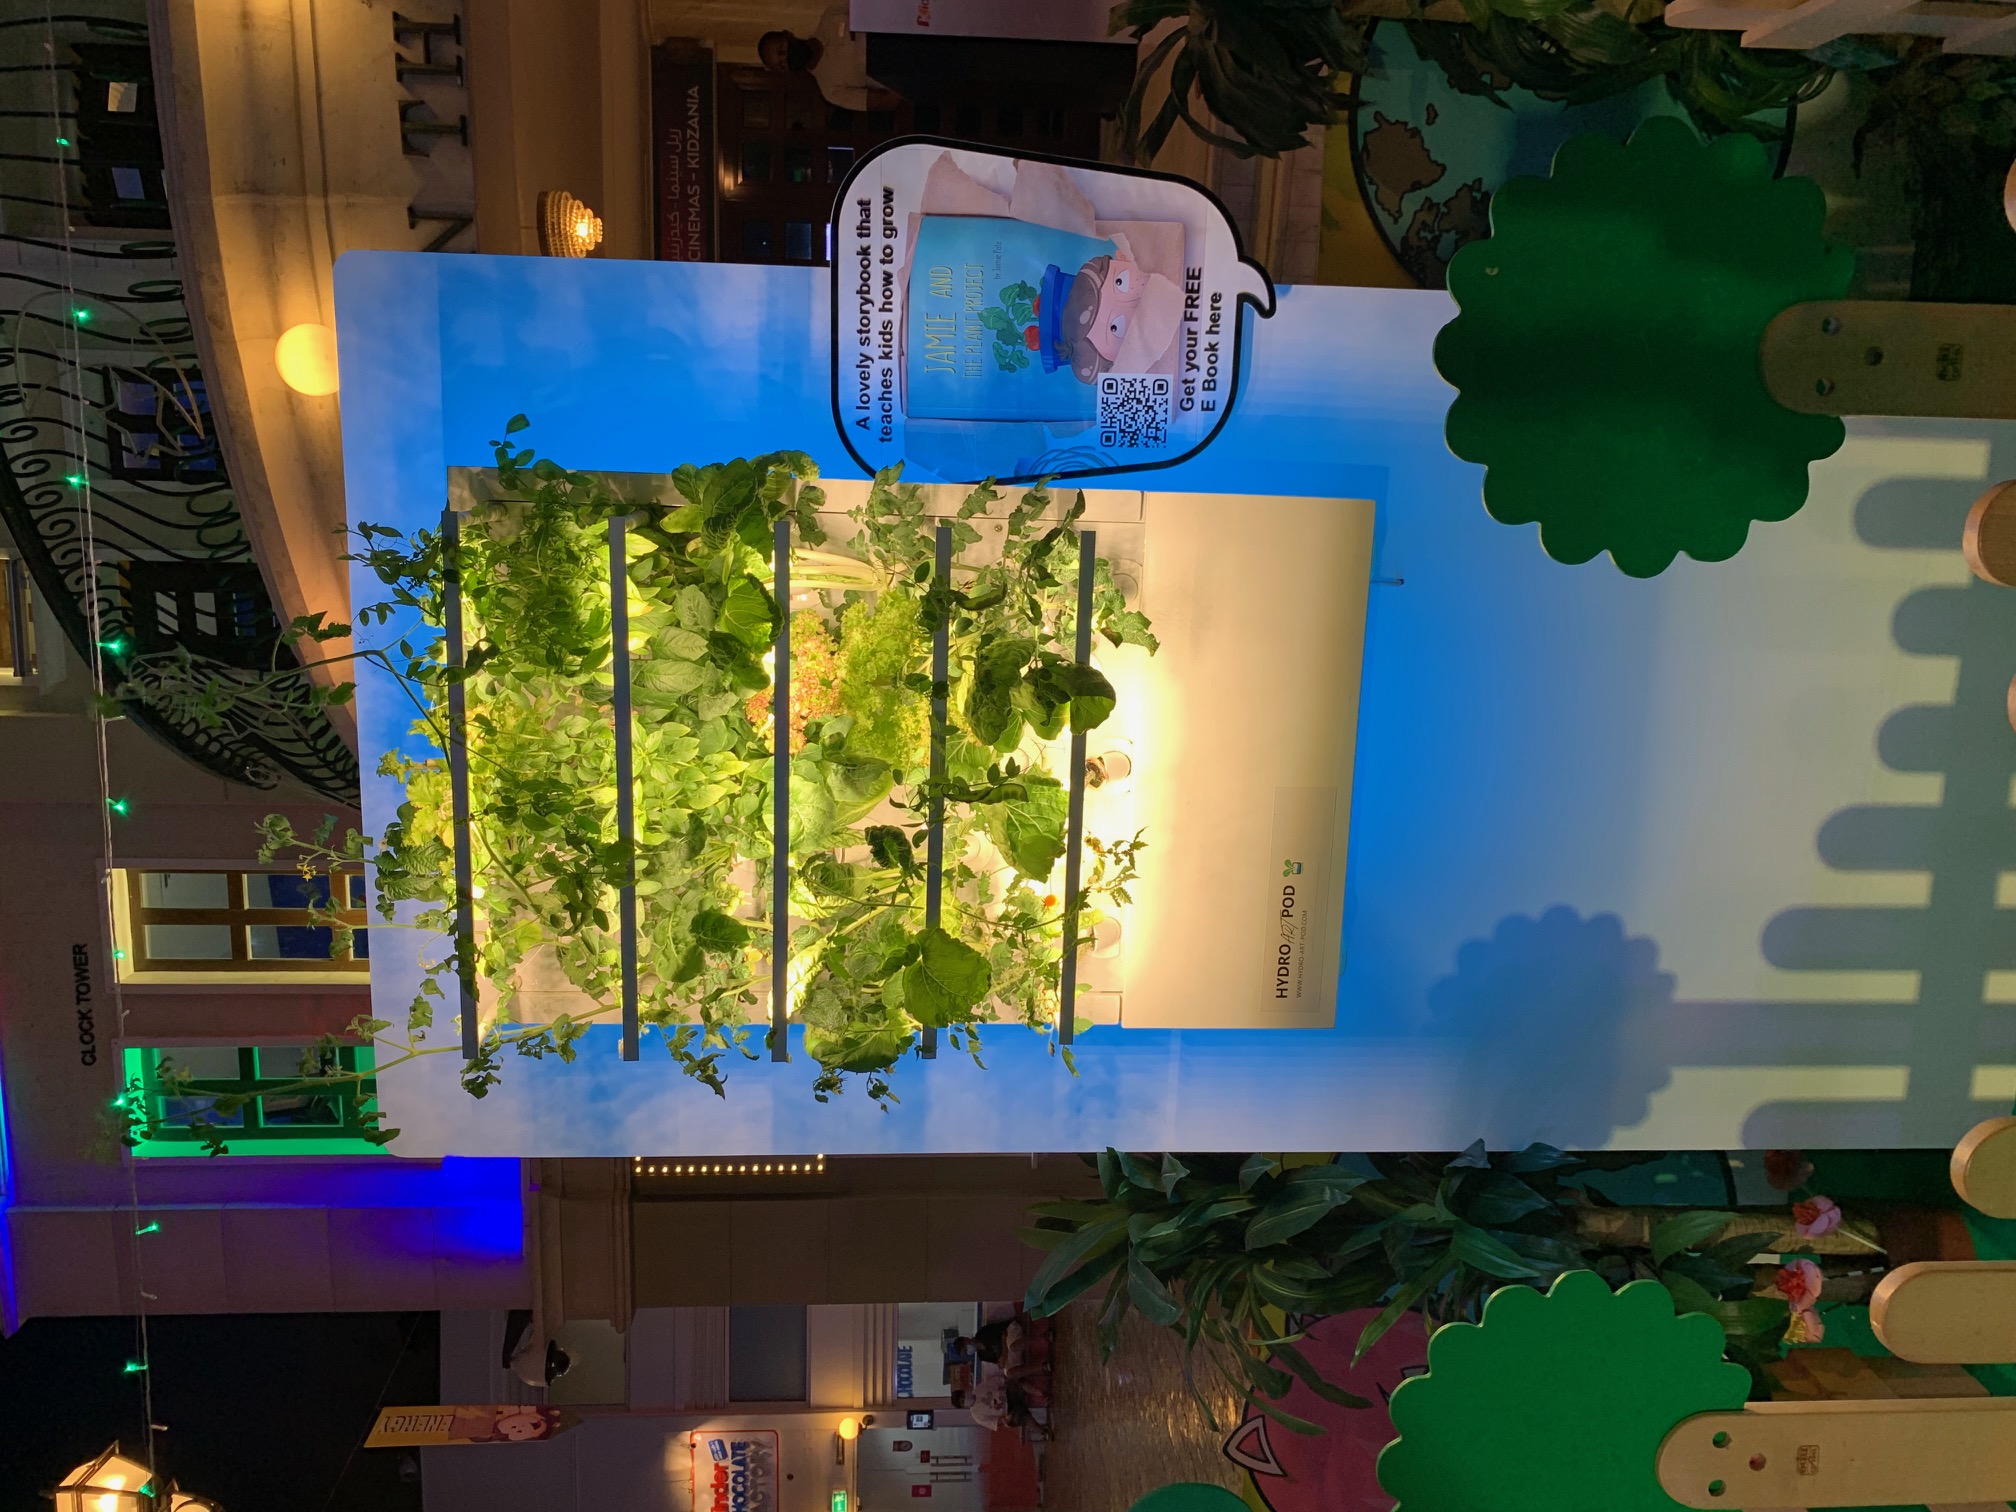 How does it grow?The “Smart Garden” developed by Masdar City teaches children to make food